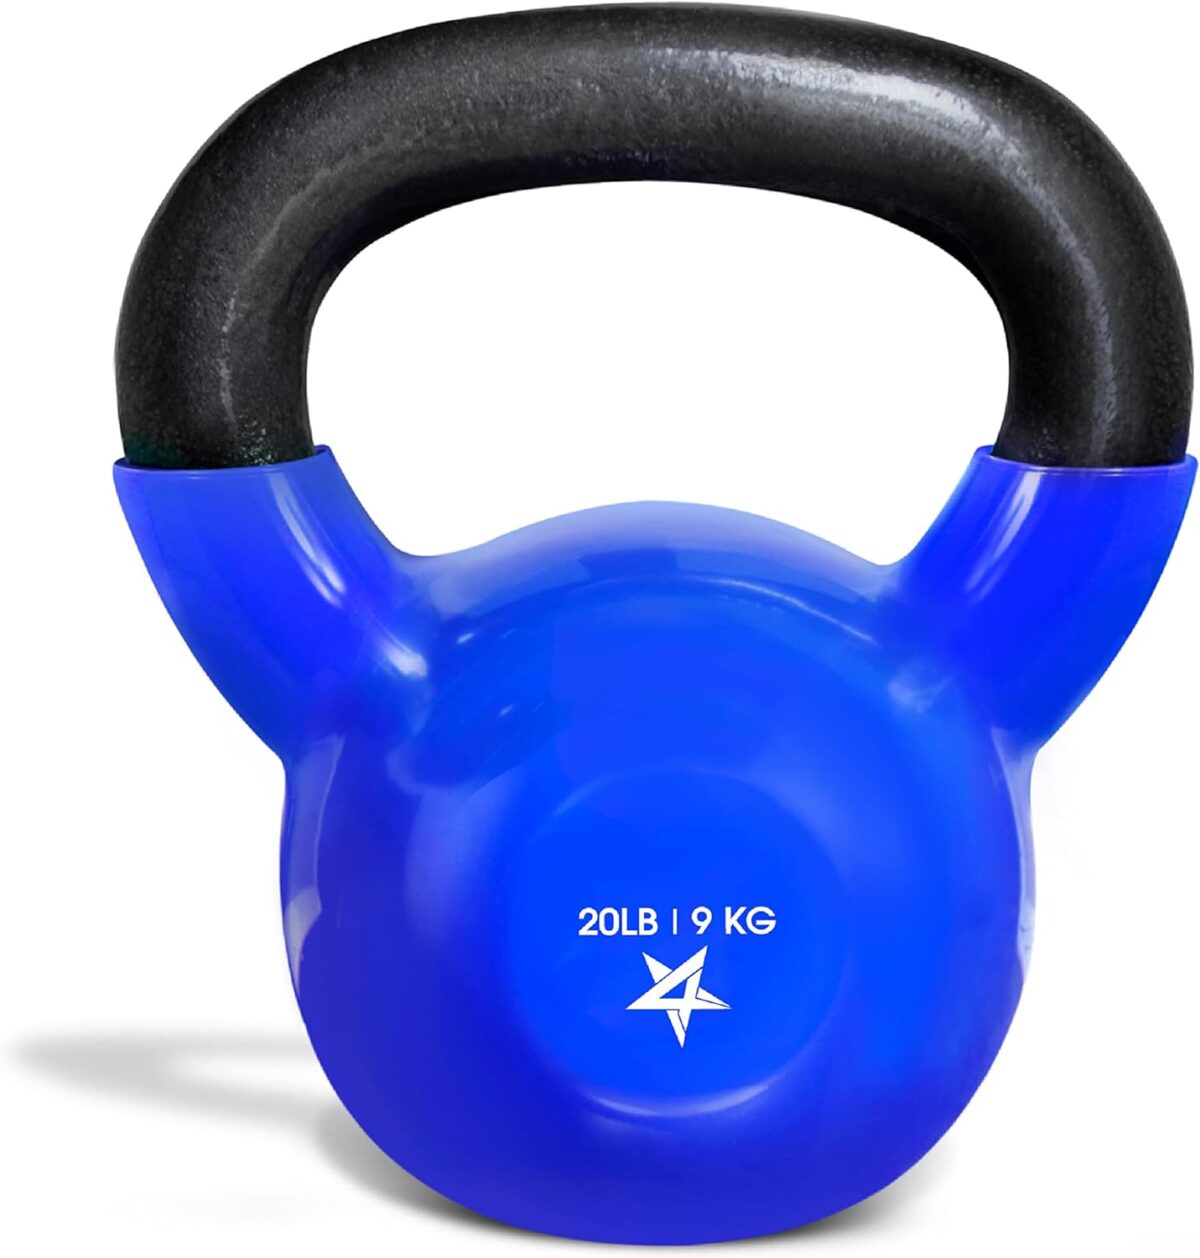 Featured Image for Yes4All Kettlebell Vinyl Coated Cast Iron – Great for Dumbbell Weights Exercises, Full Body Workout Equipment Push up, Grip Strength and Strength Training, PVC